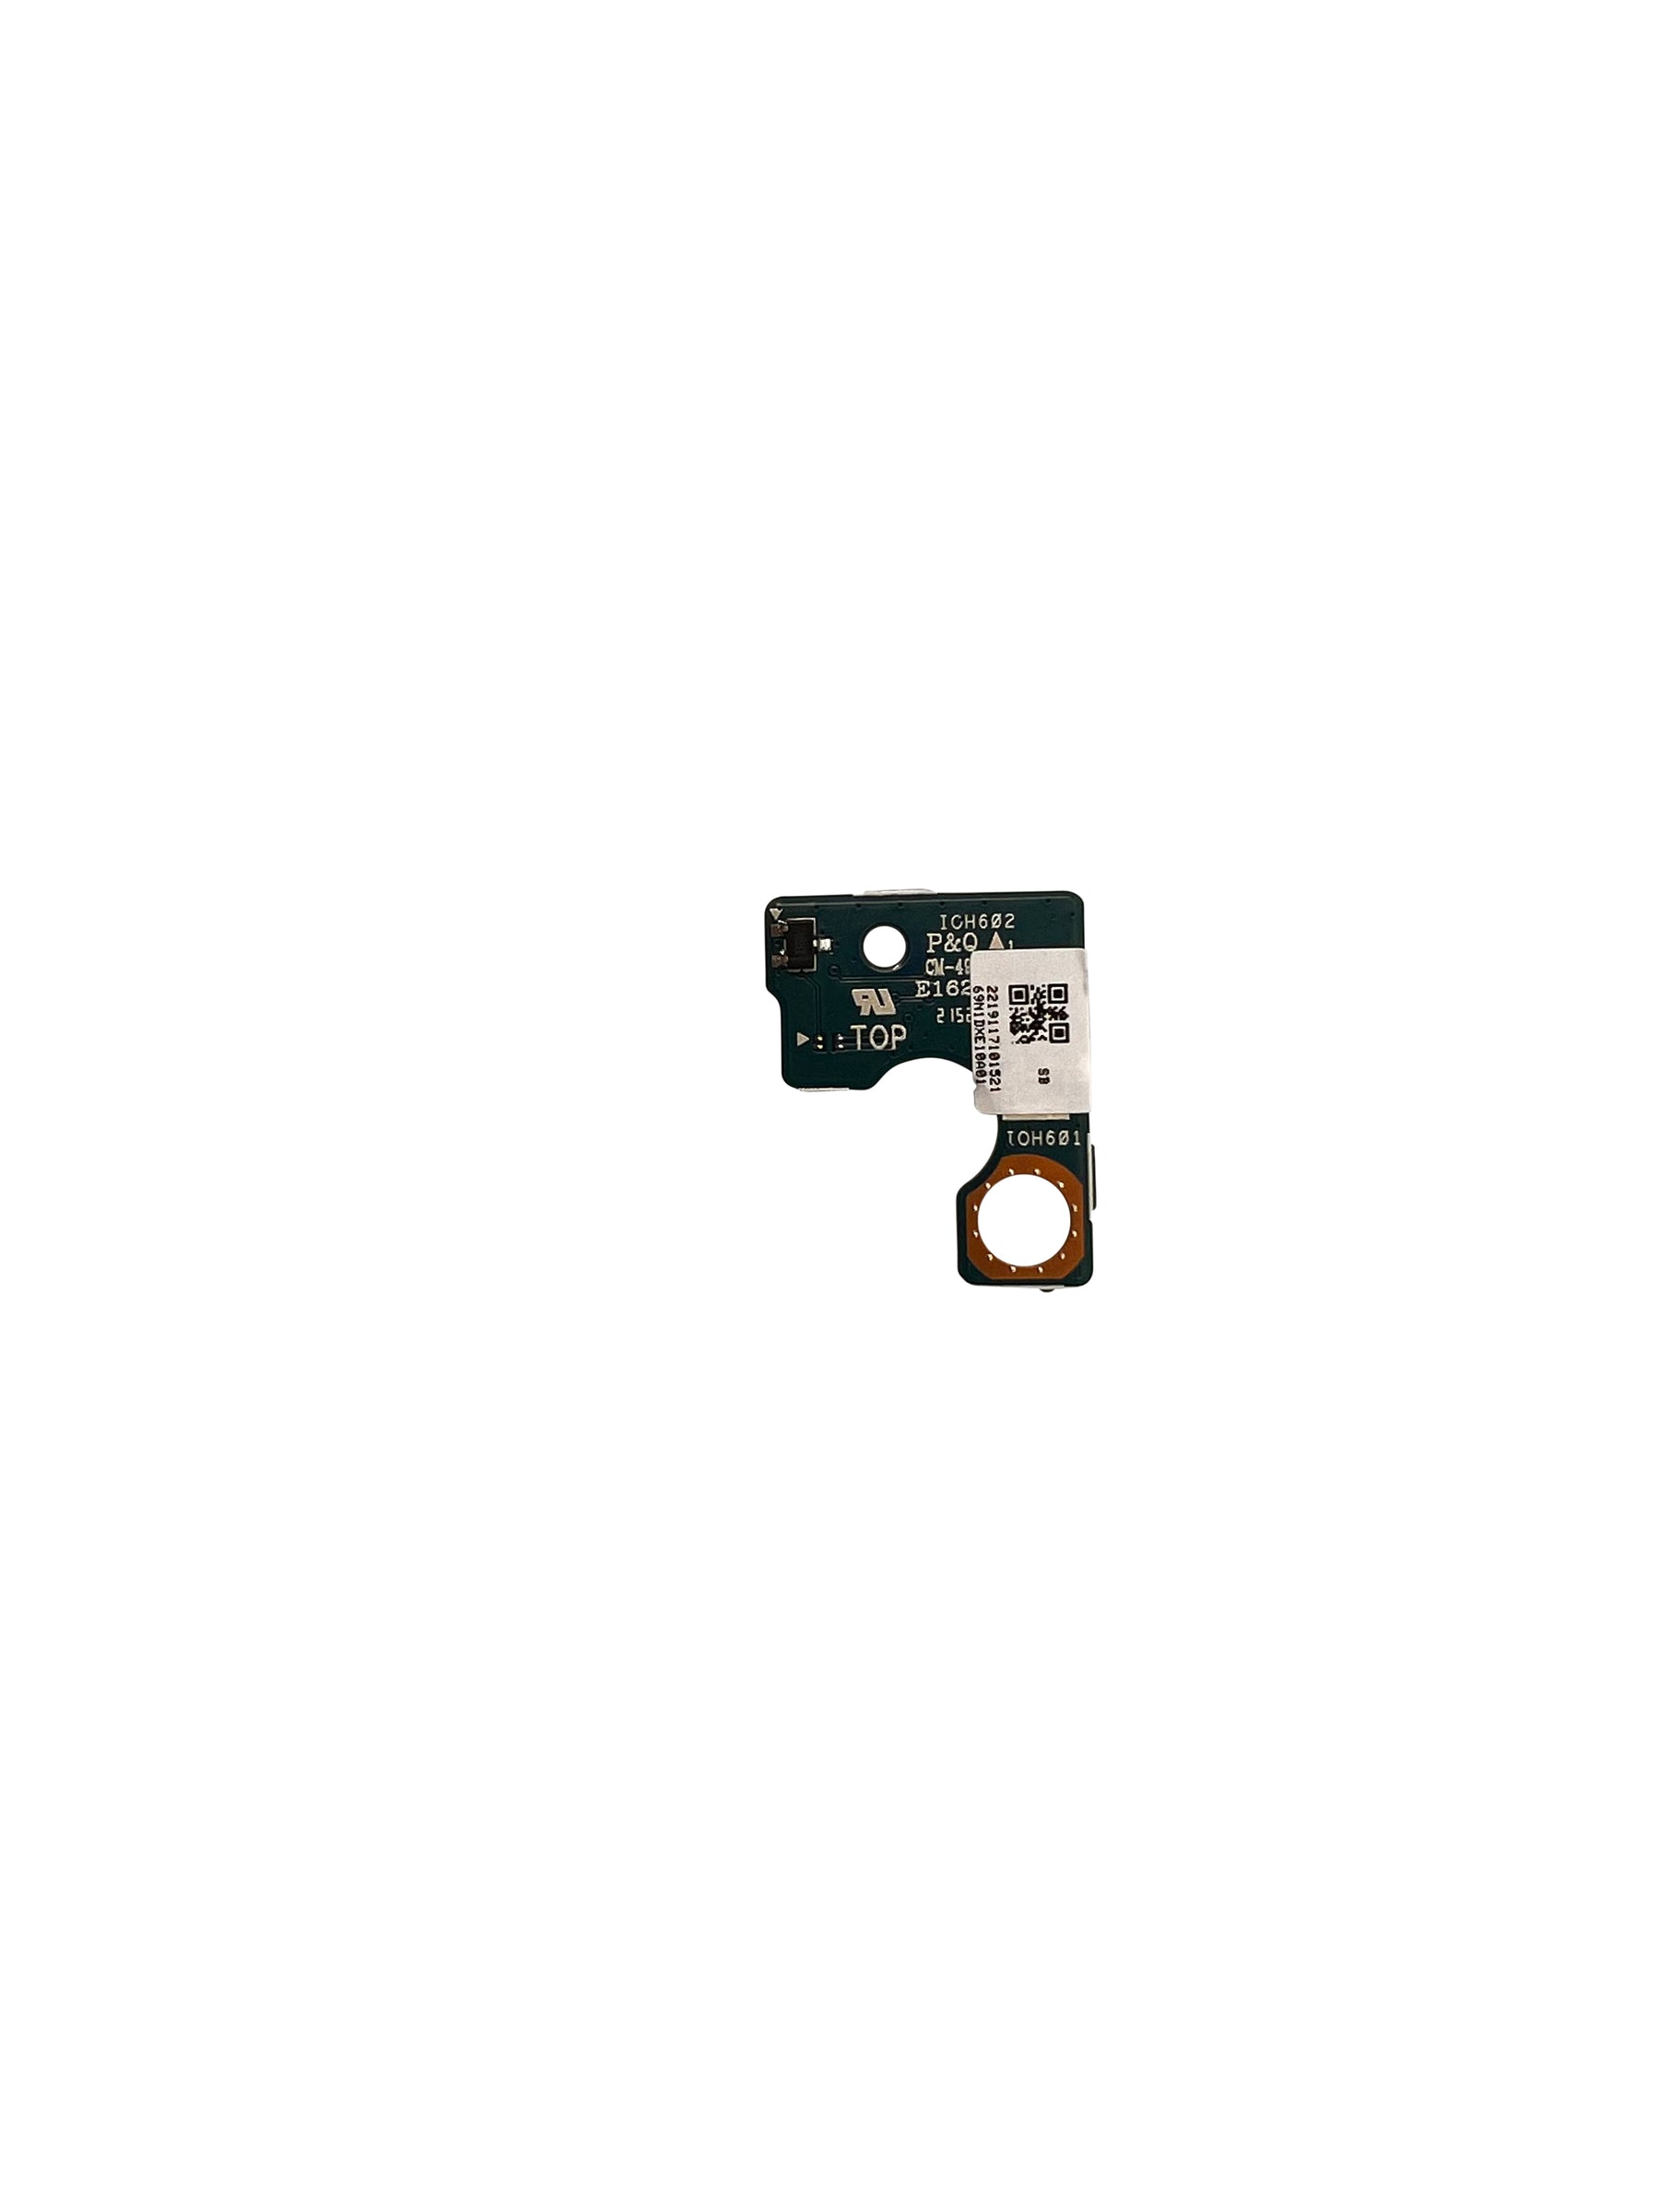 Renewed Replacement USB Sensor Board for CTL Chromebook PX14E Series.